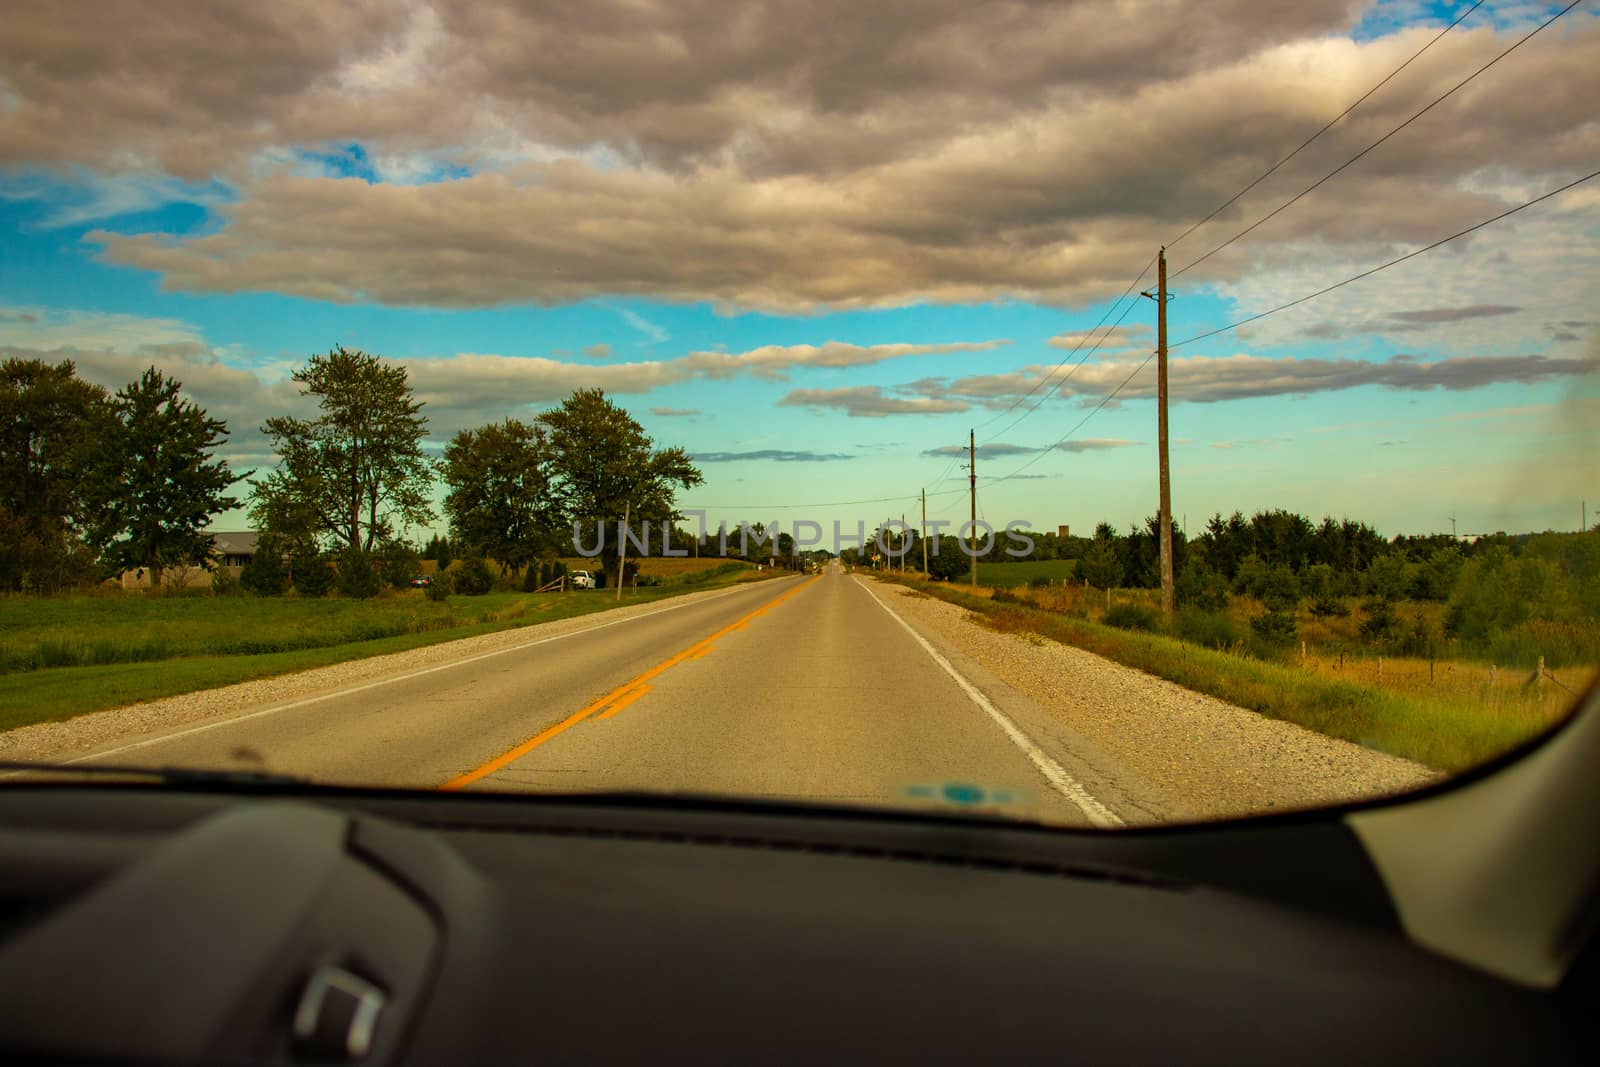 Driving through countryside. Travelling, road, way, summer, vacation, ontheroad, forward, clouds, cloudy, cloudsky, beautifulclouds, awesome, weather, seasons.